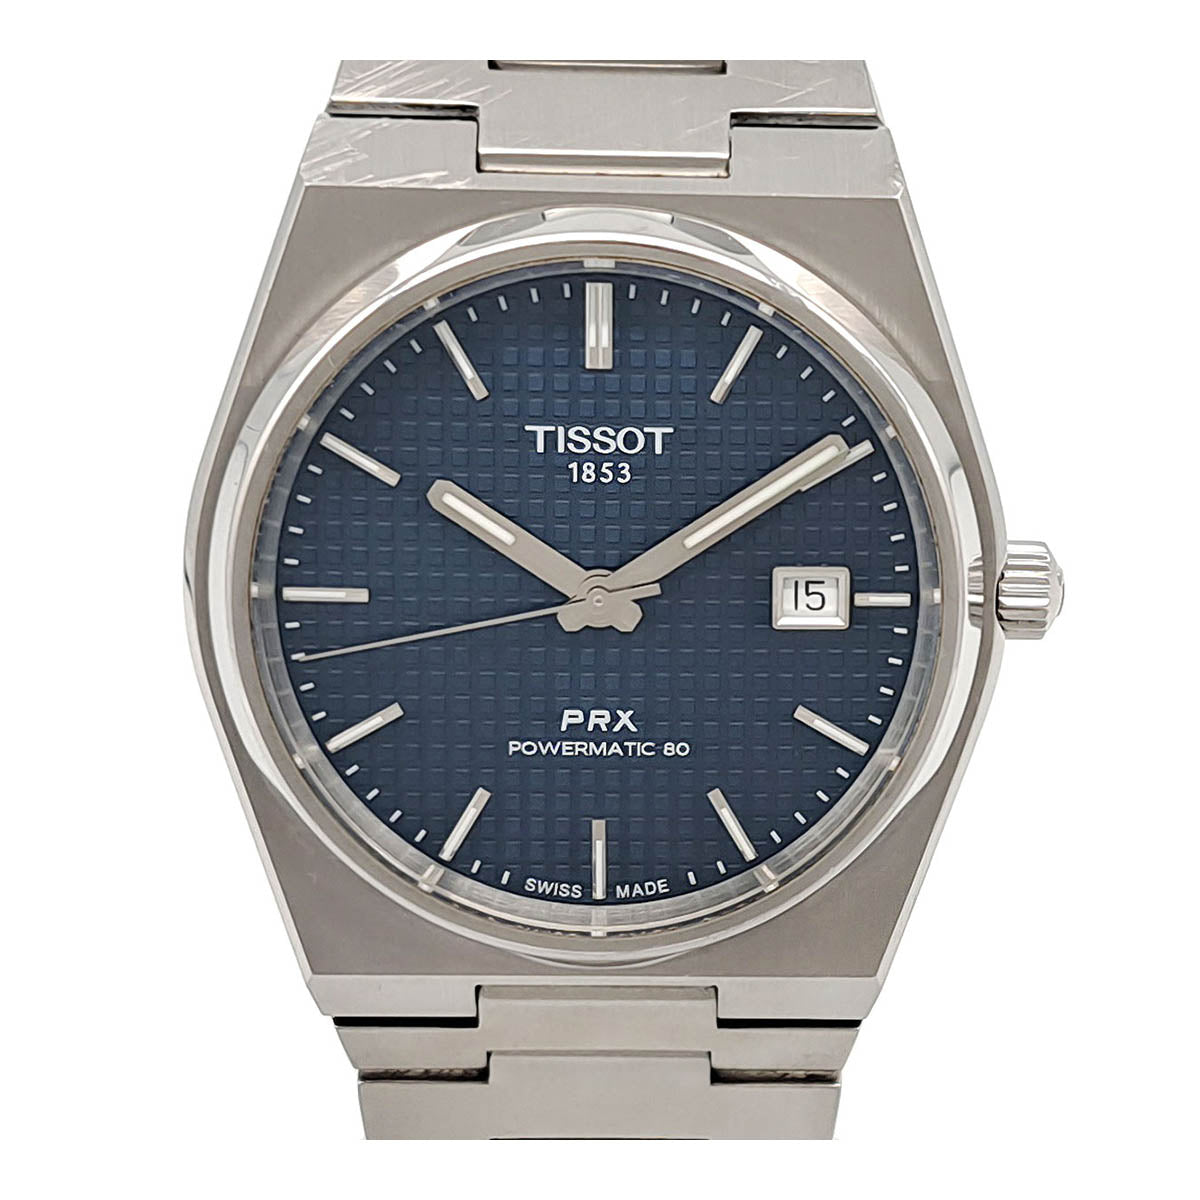 TISSOT PRX Powermatic 80 Men's Automatic Watch in Stainless Steel T137.407.11.041.00